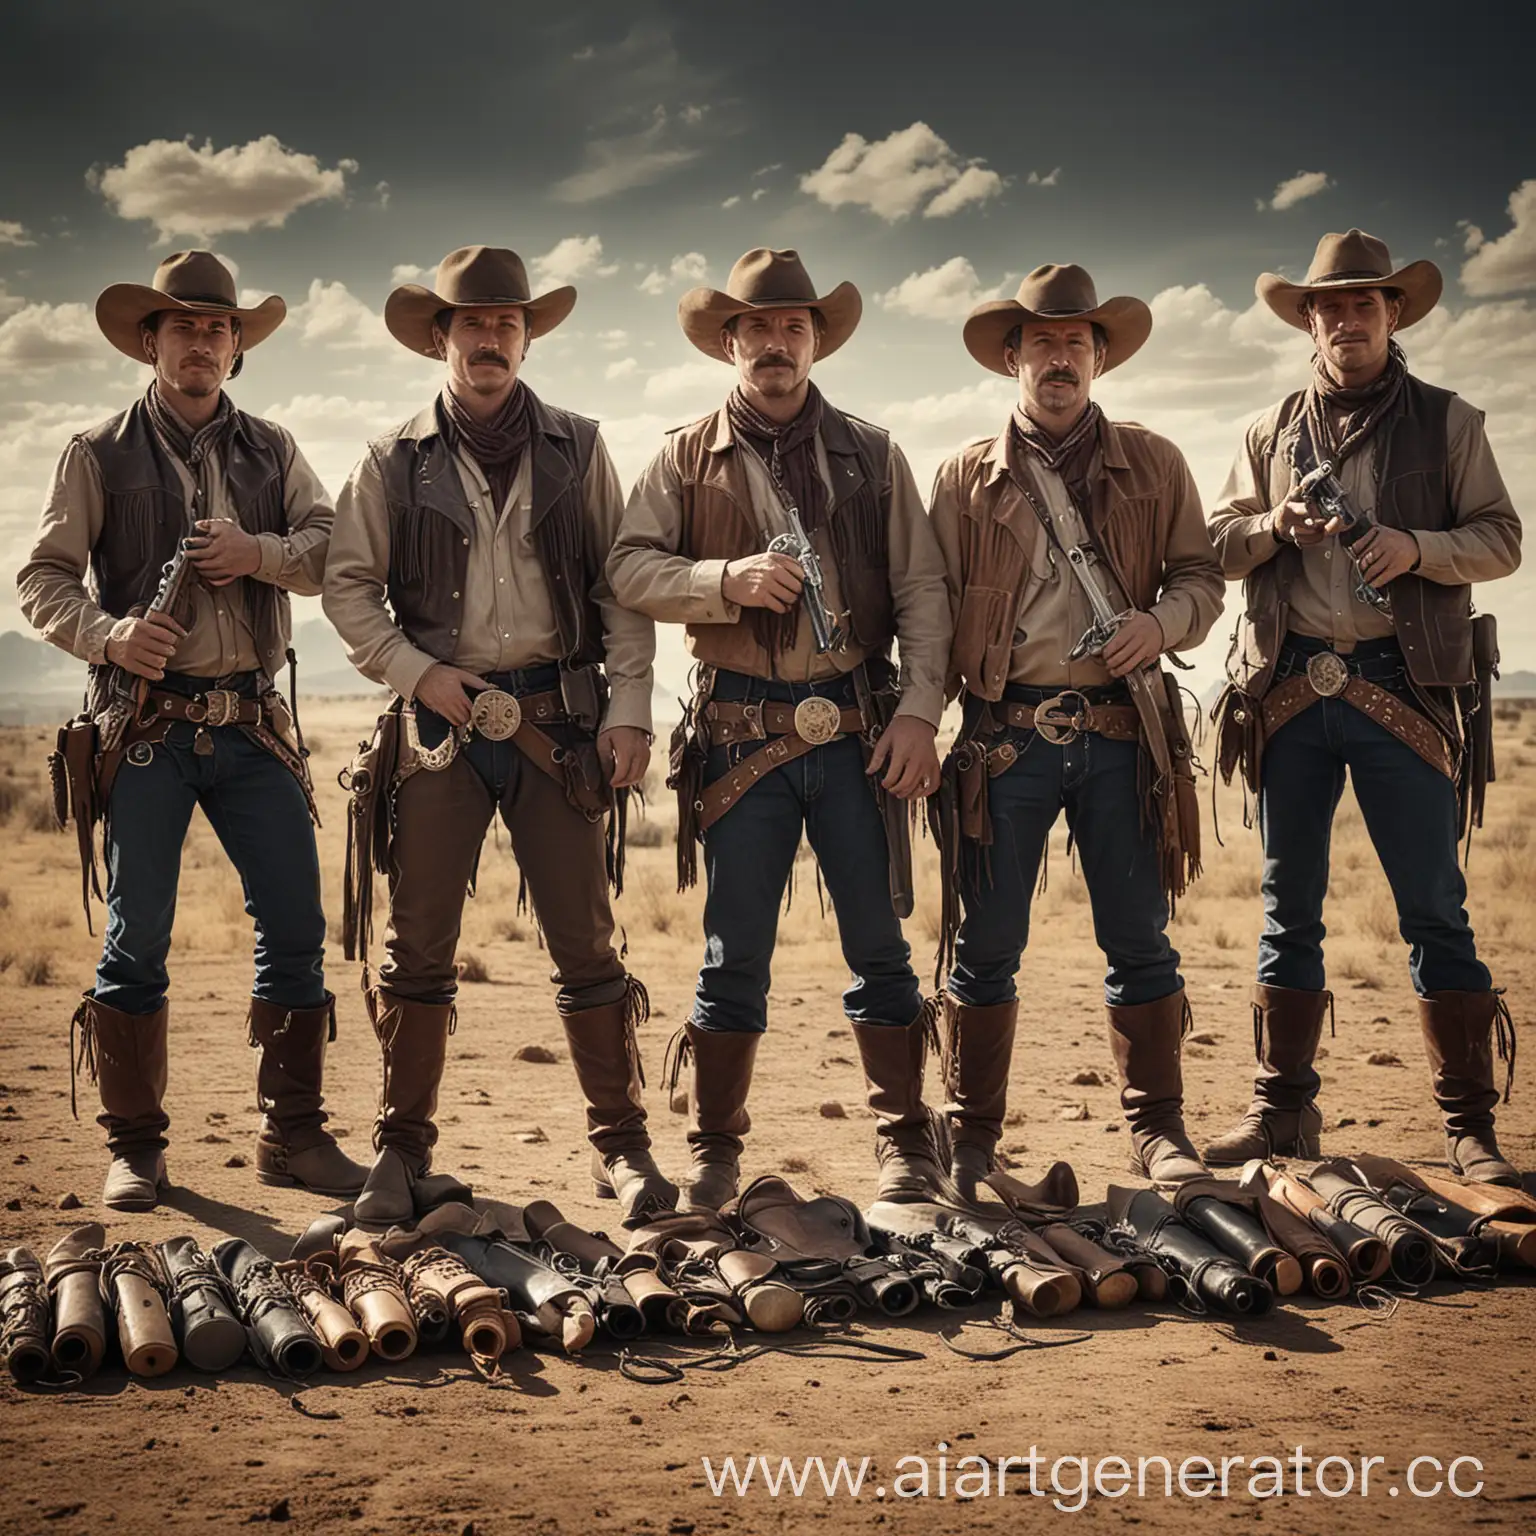 Diverse-Cowboy-Group-with-Western-Gear-and-Arms